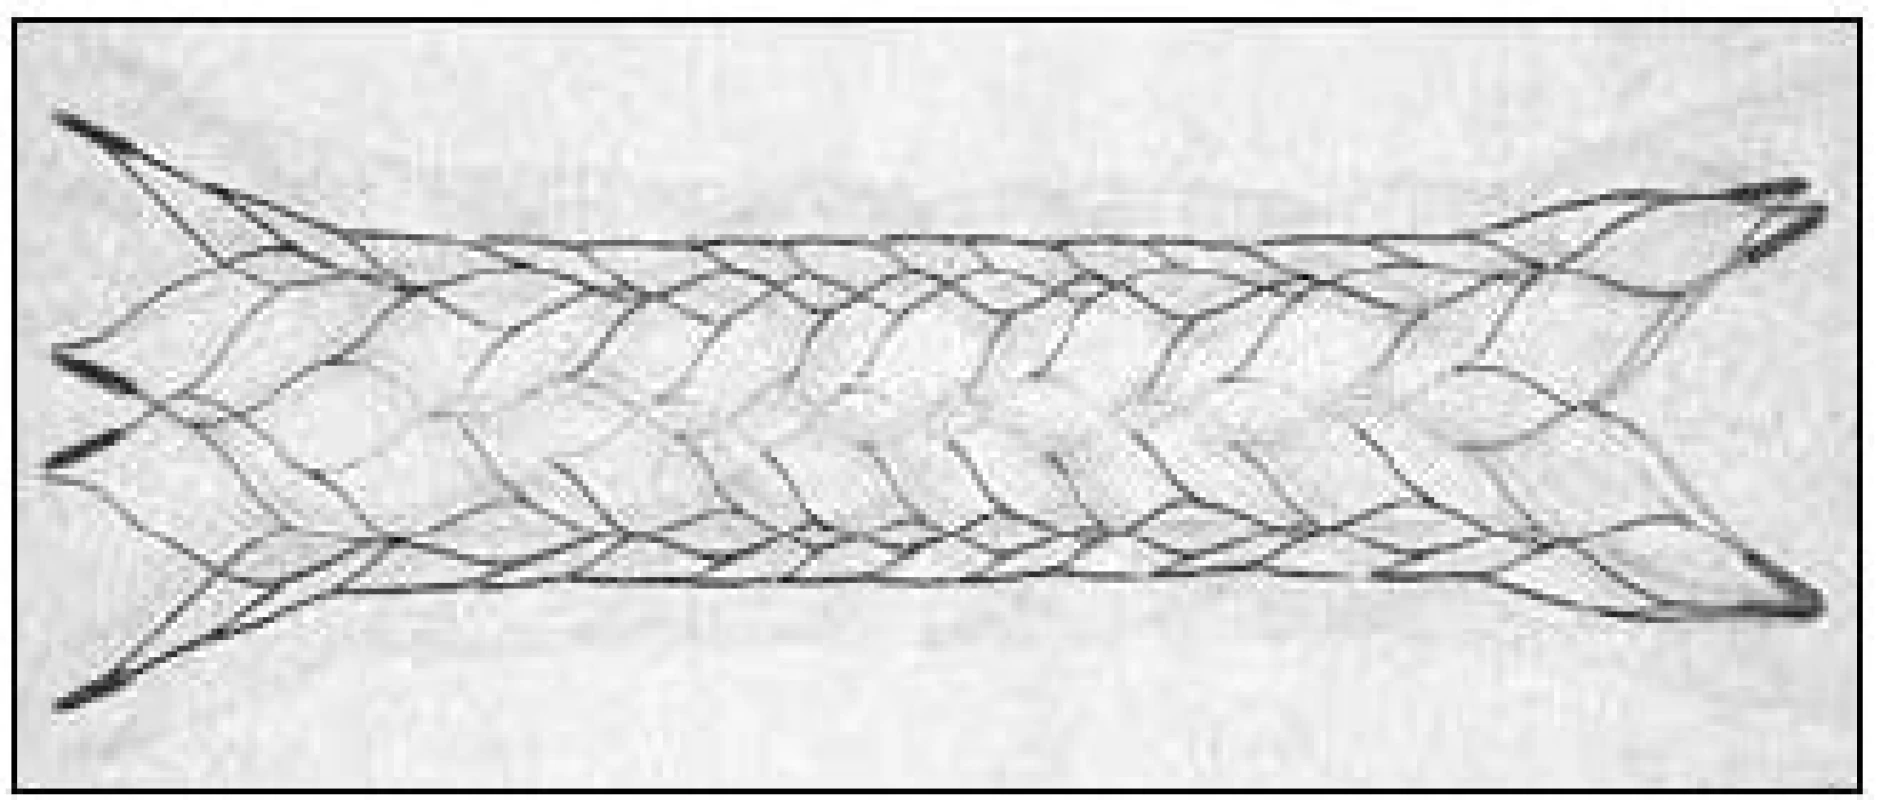 Enterprise&lt;sup&gt;TM&lt;/sup&gt; stent (Cordis Neurovascular, Miami Lakes, FL, USA).
Available from: URL: http://www.depuy.com/healthcare-professionals/product-details/enterprise-vascularreconstruction-device-and-delivery-syst.